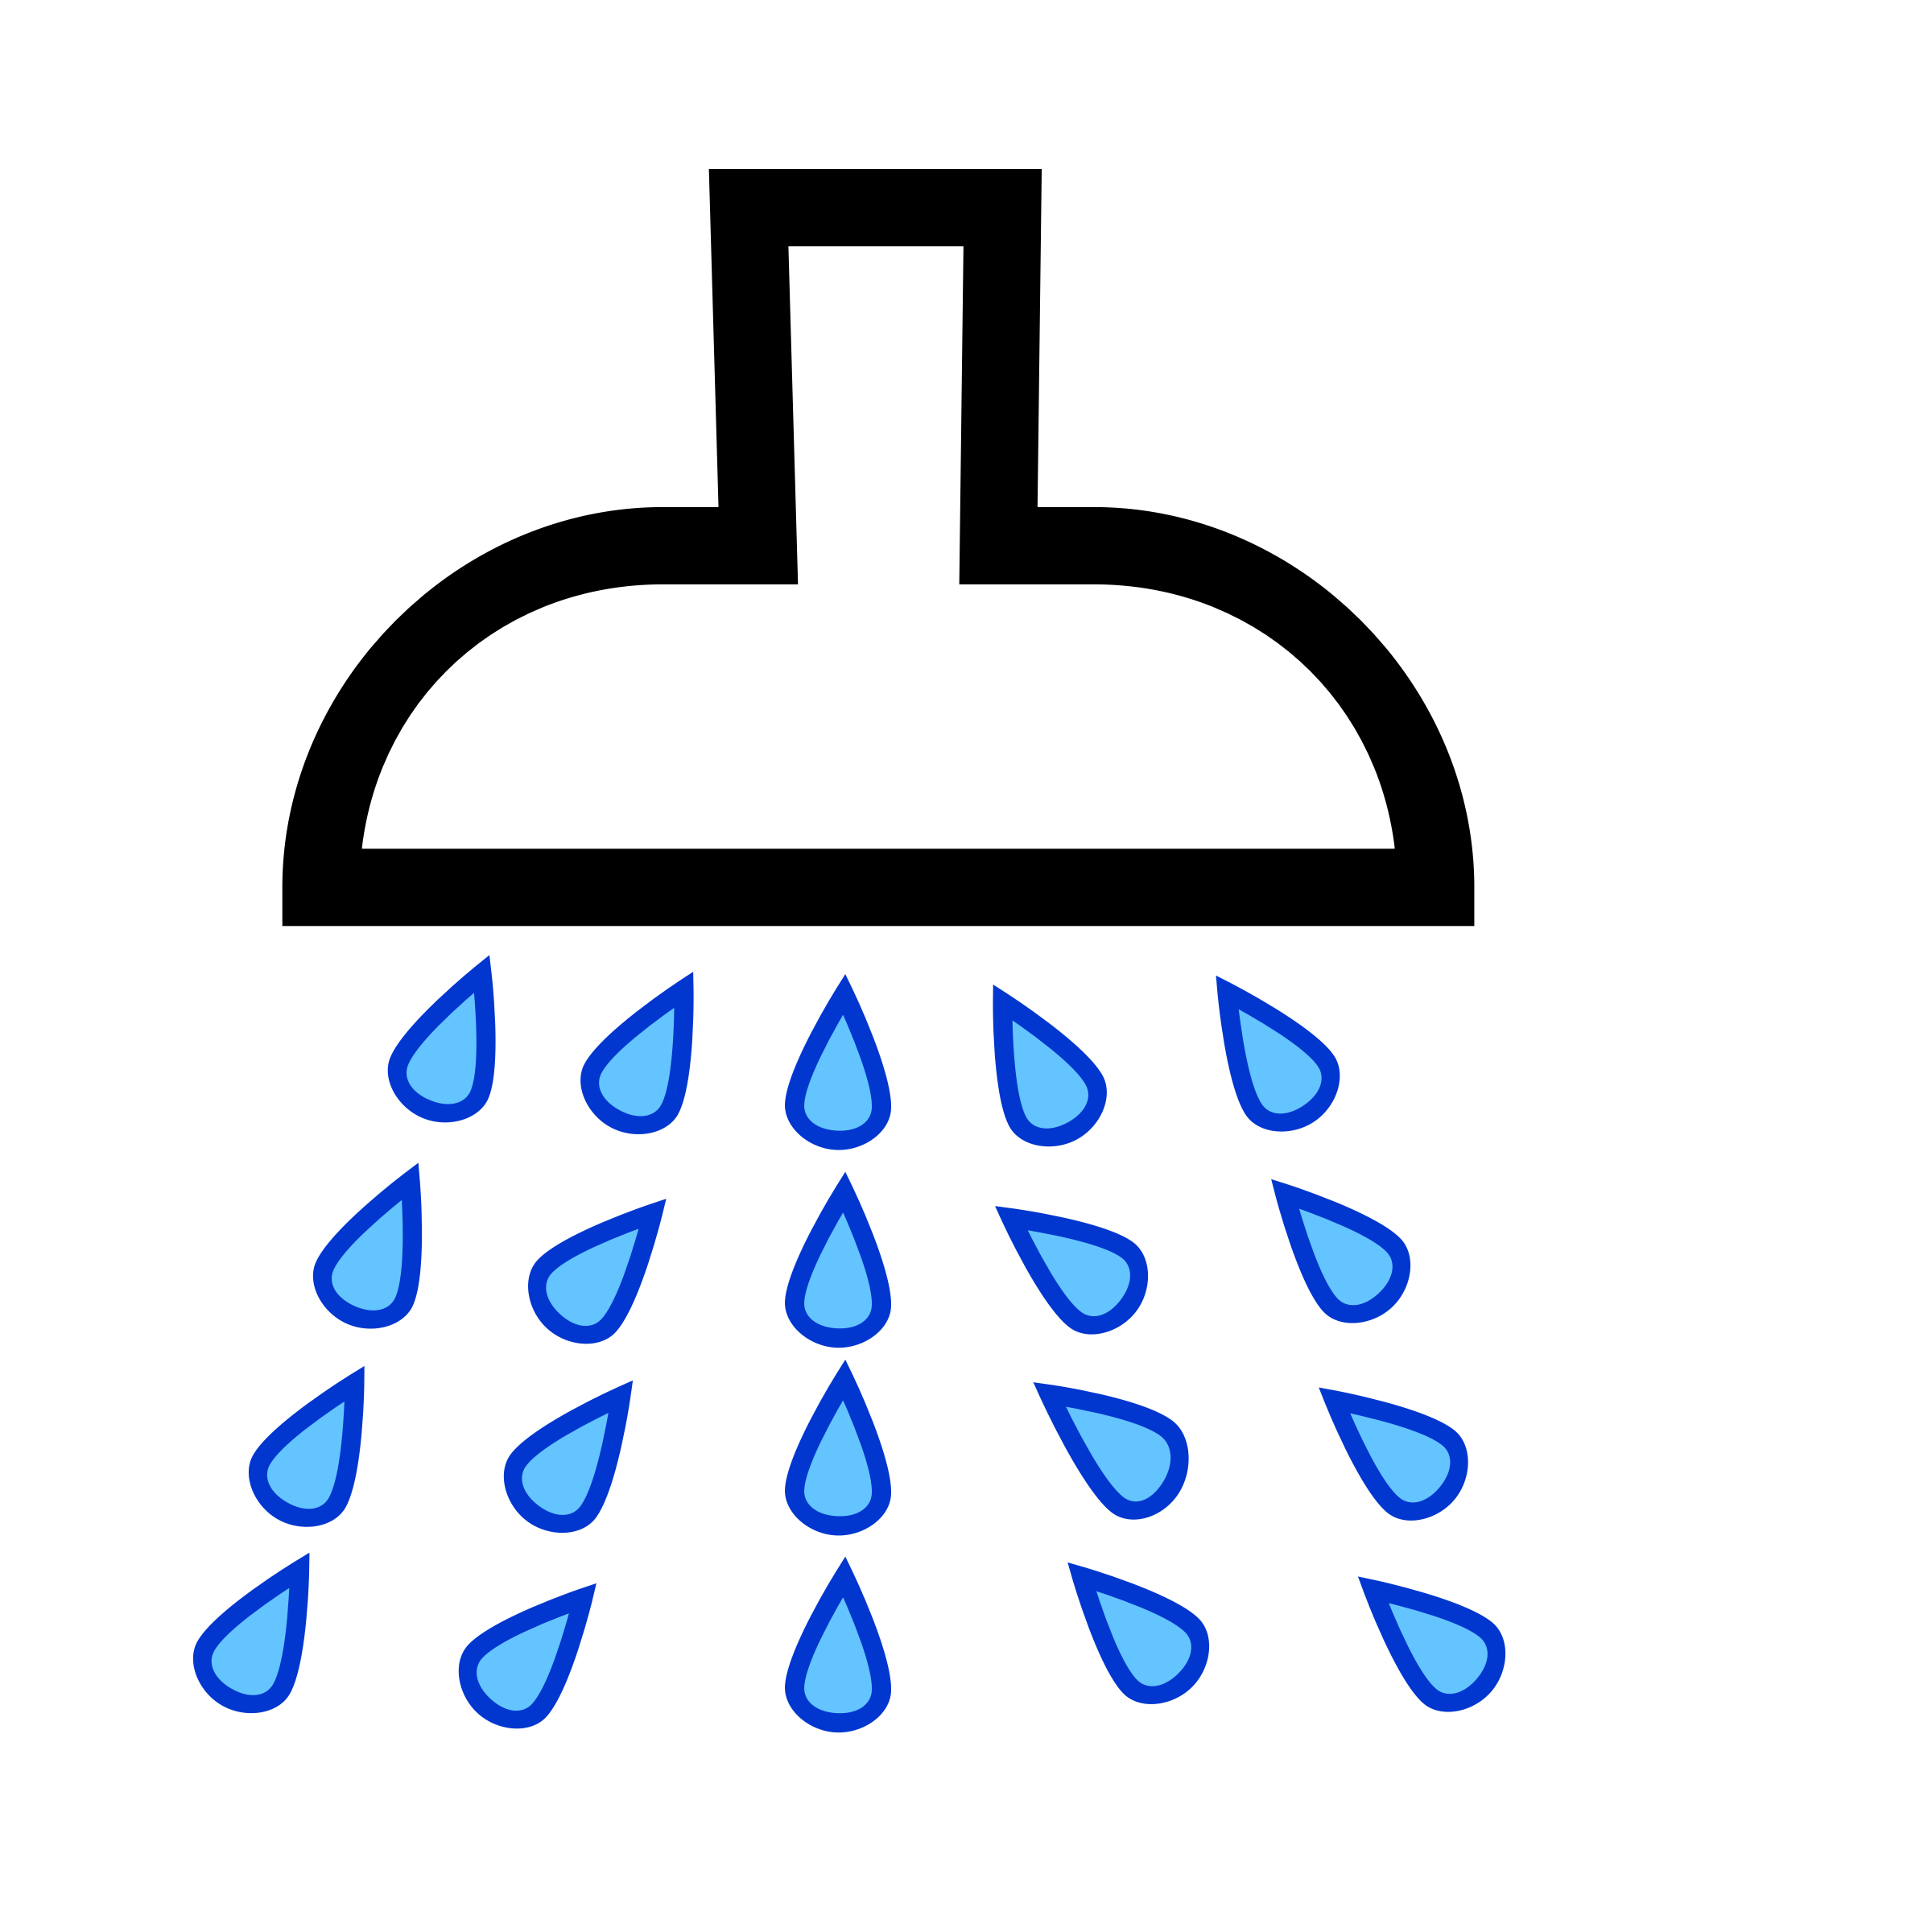 ... Shower Clip Art Free - Free Clipart Images ...